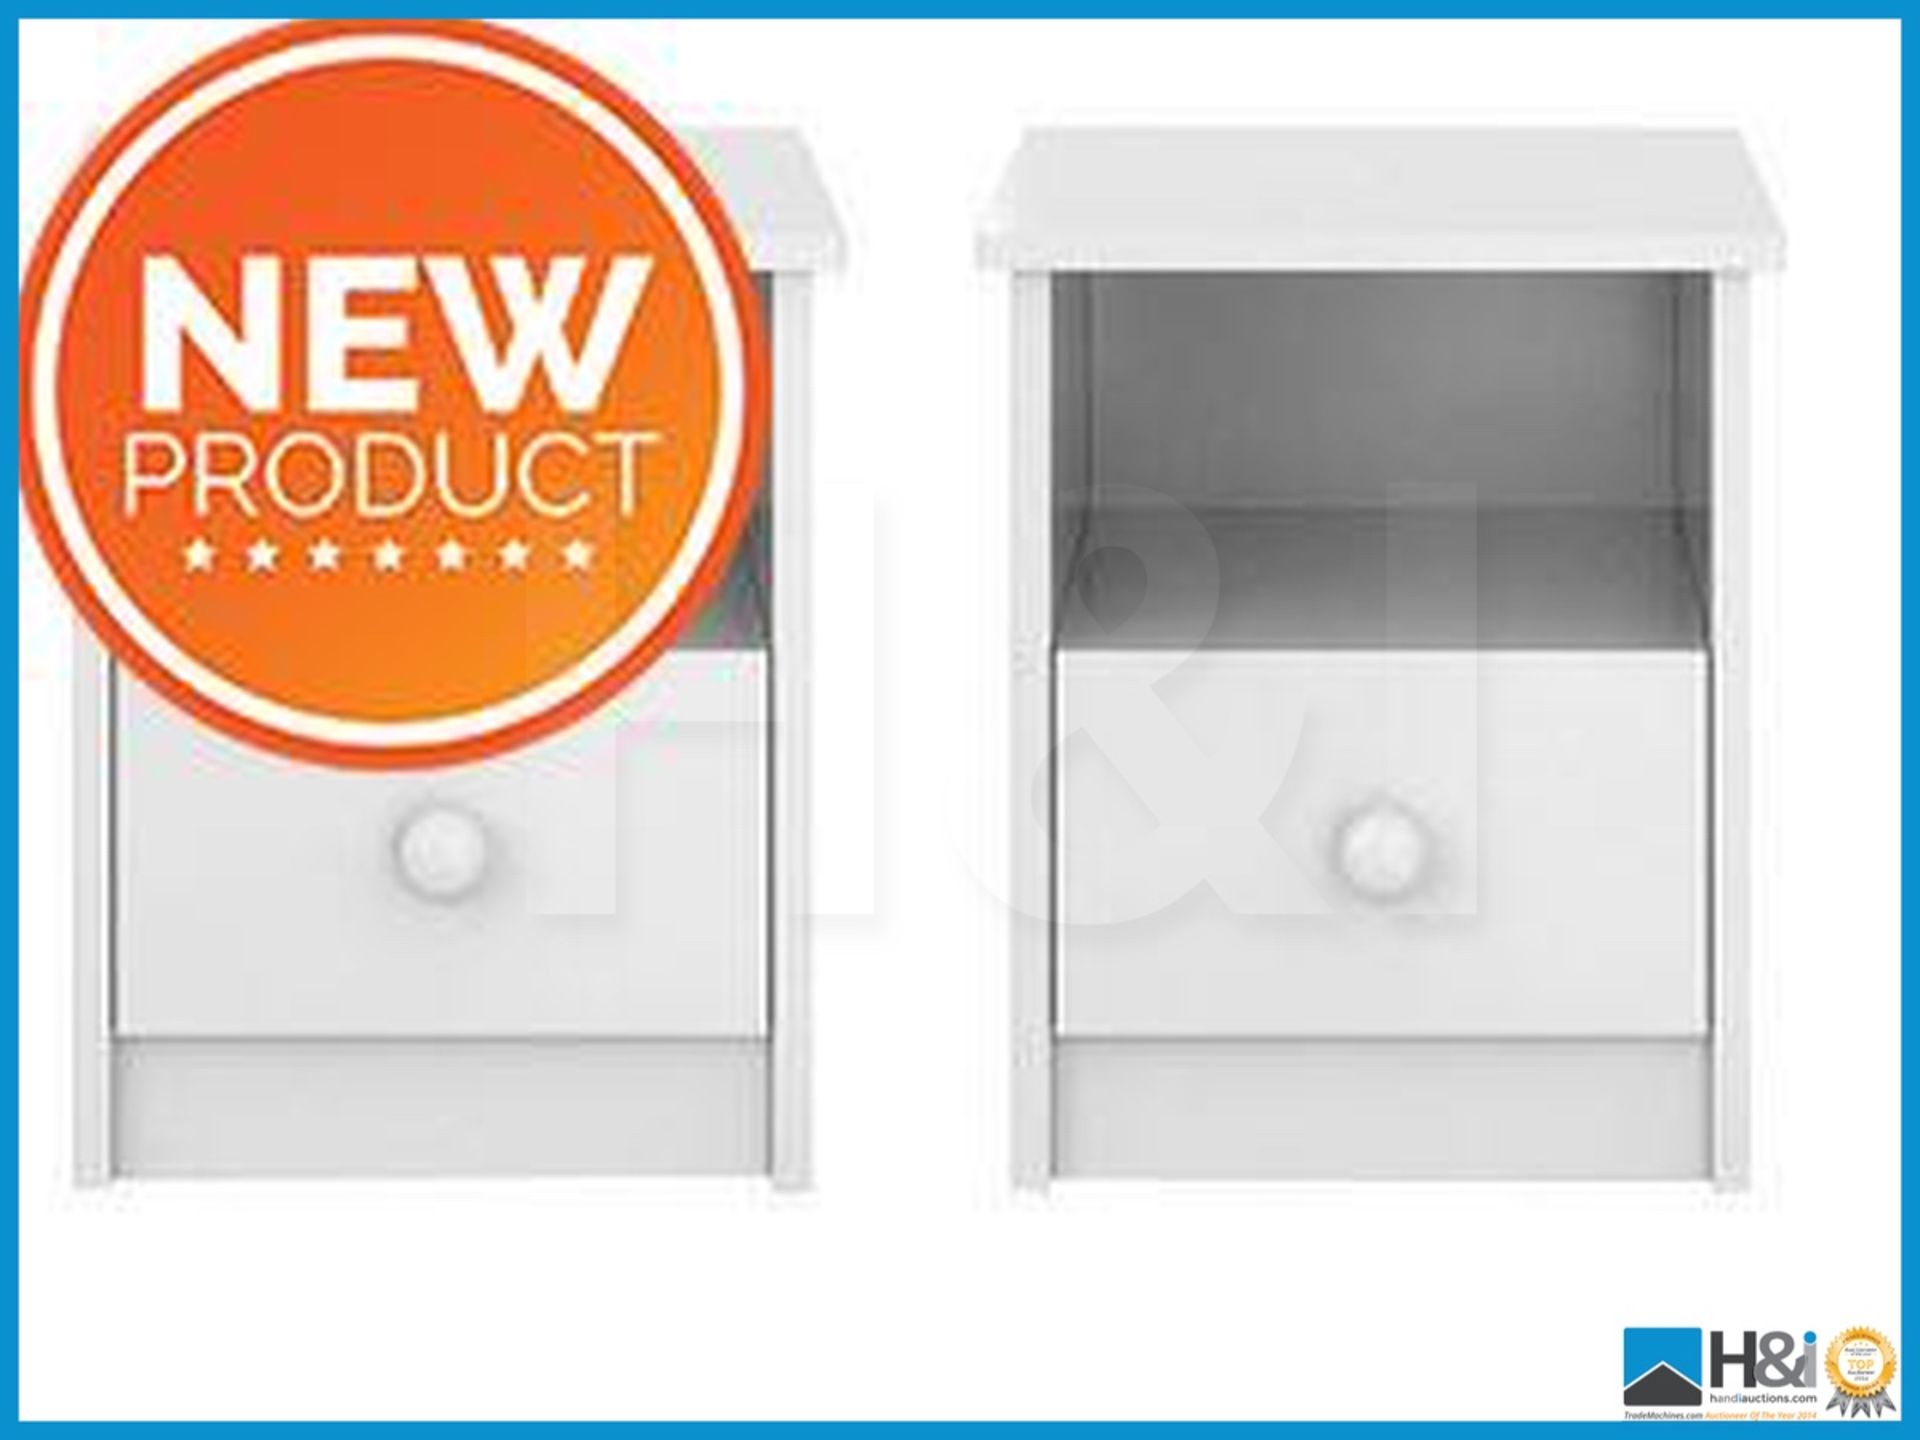 NEW IN BOX BANBURY 1DRAWER PAIR BEDSIDE [WHITE] 47 x 40 x 42cm RRP £259 Appraisal: Viewing Essential